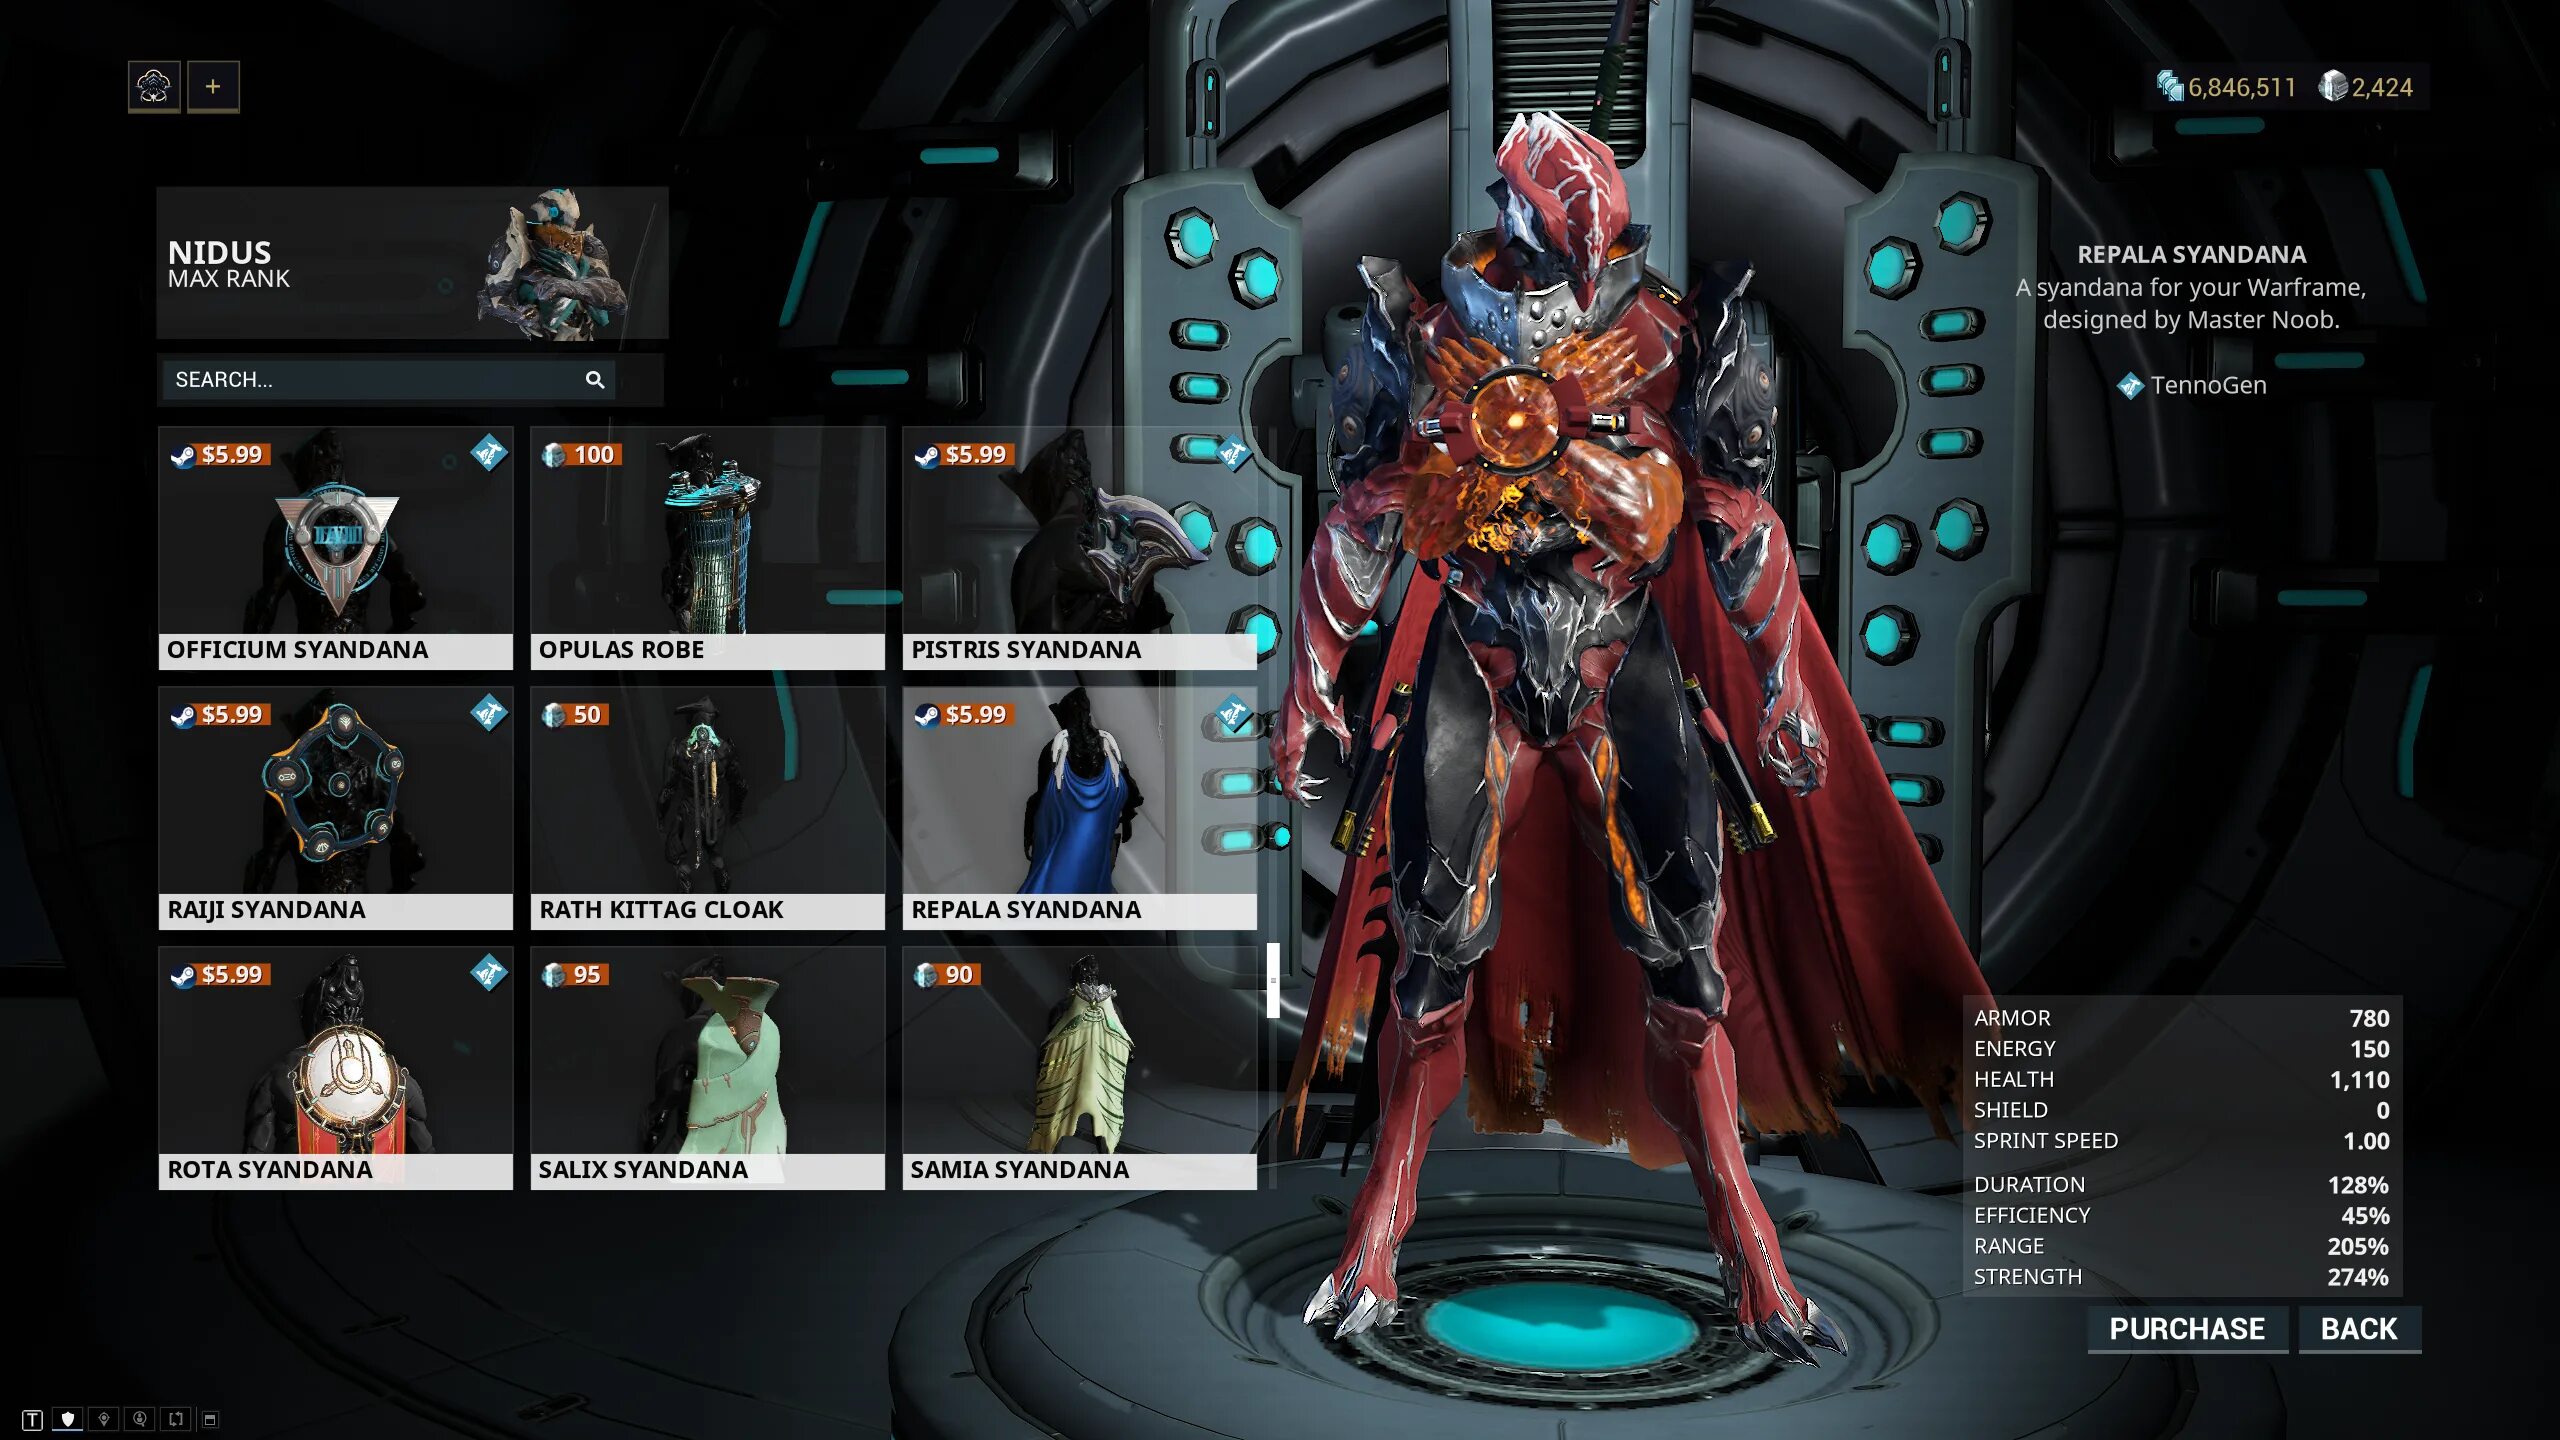 Warframe Dante. Warframe Данте. Warframe Devil May Cry. Featuring Dante from Devil May Cry. Данте варфрейм